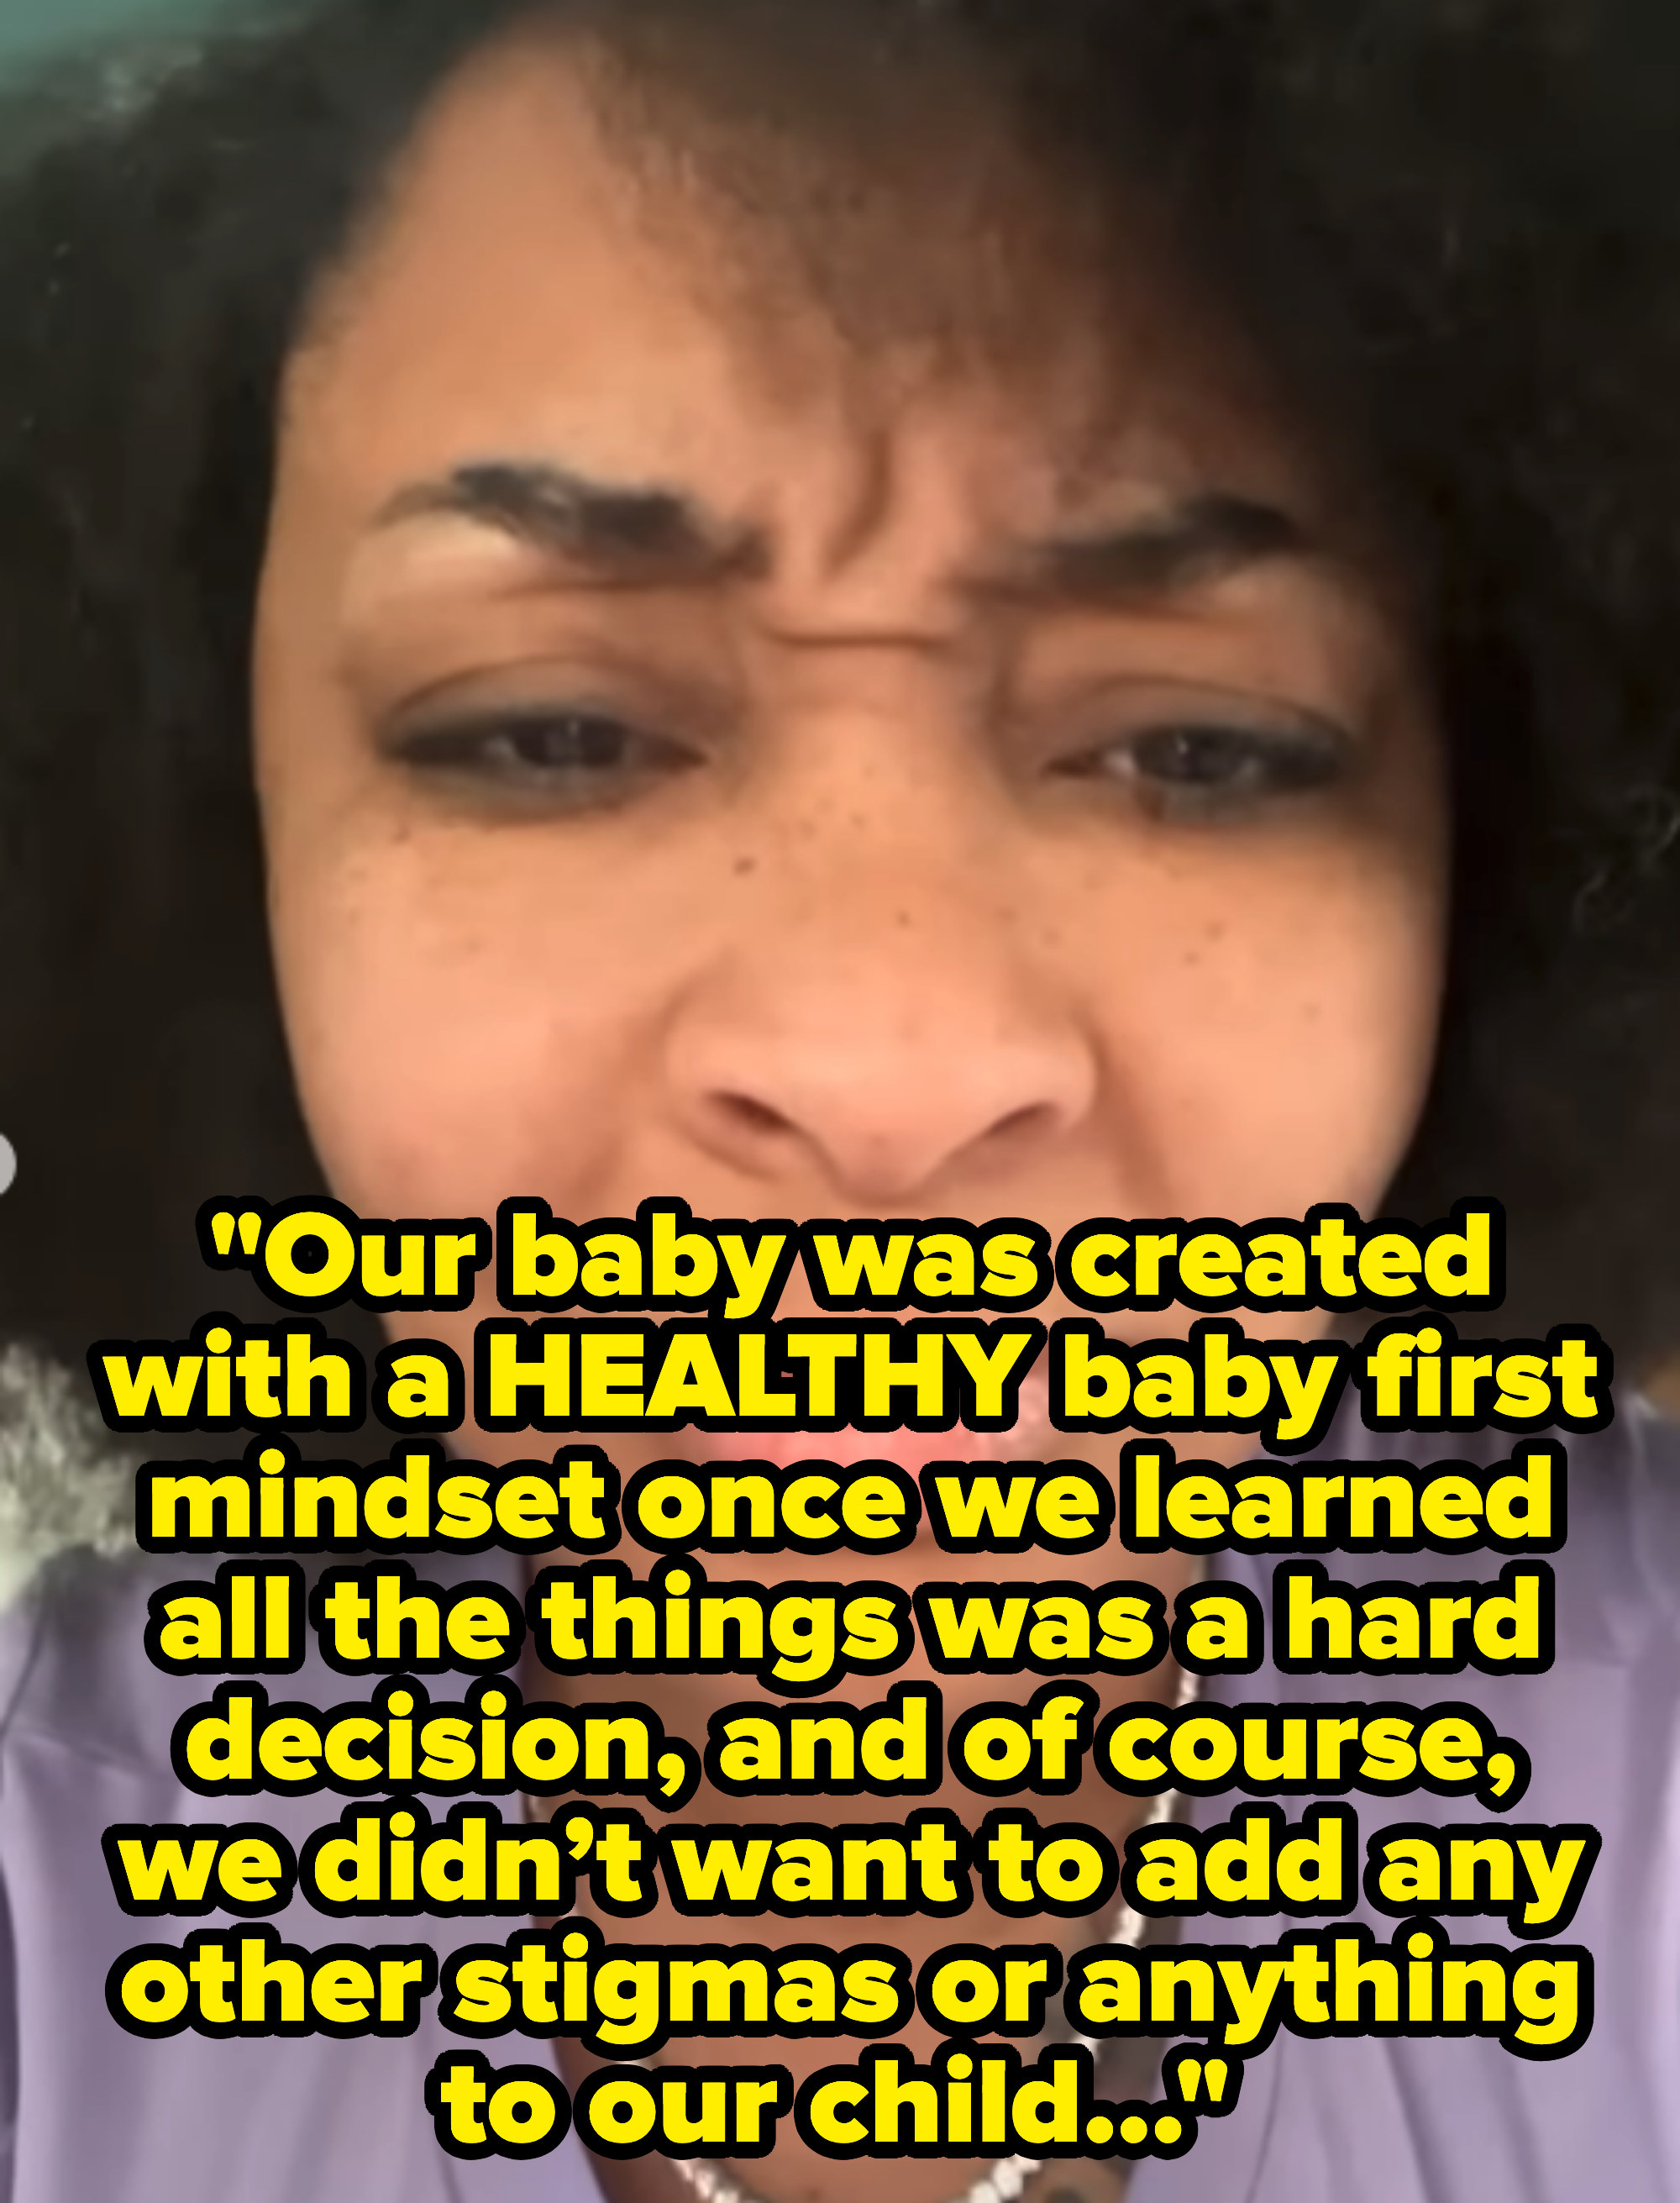 She says their baby was created with a healthy baby first mindset